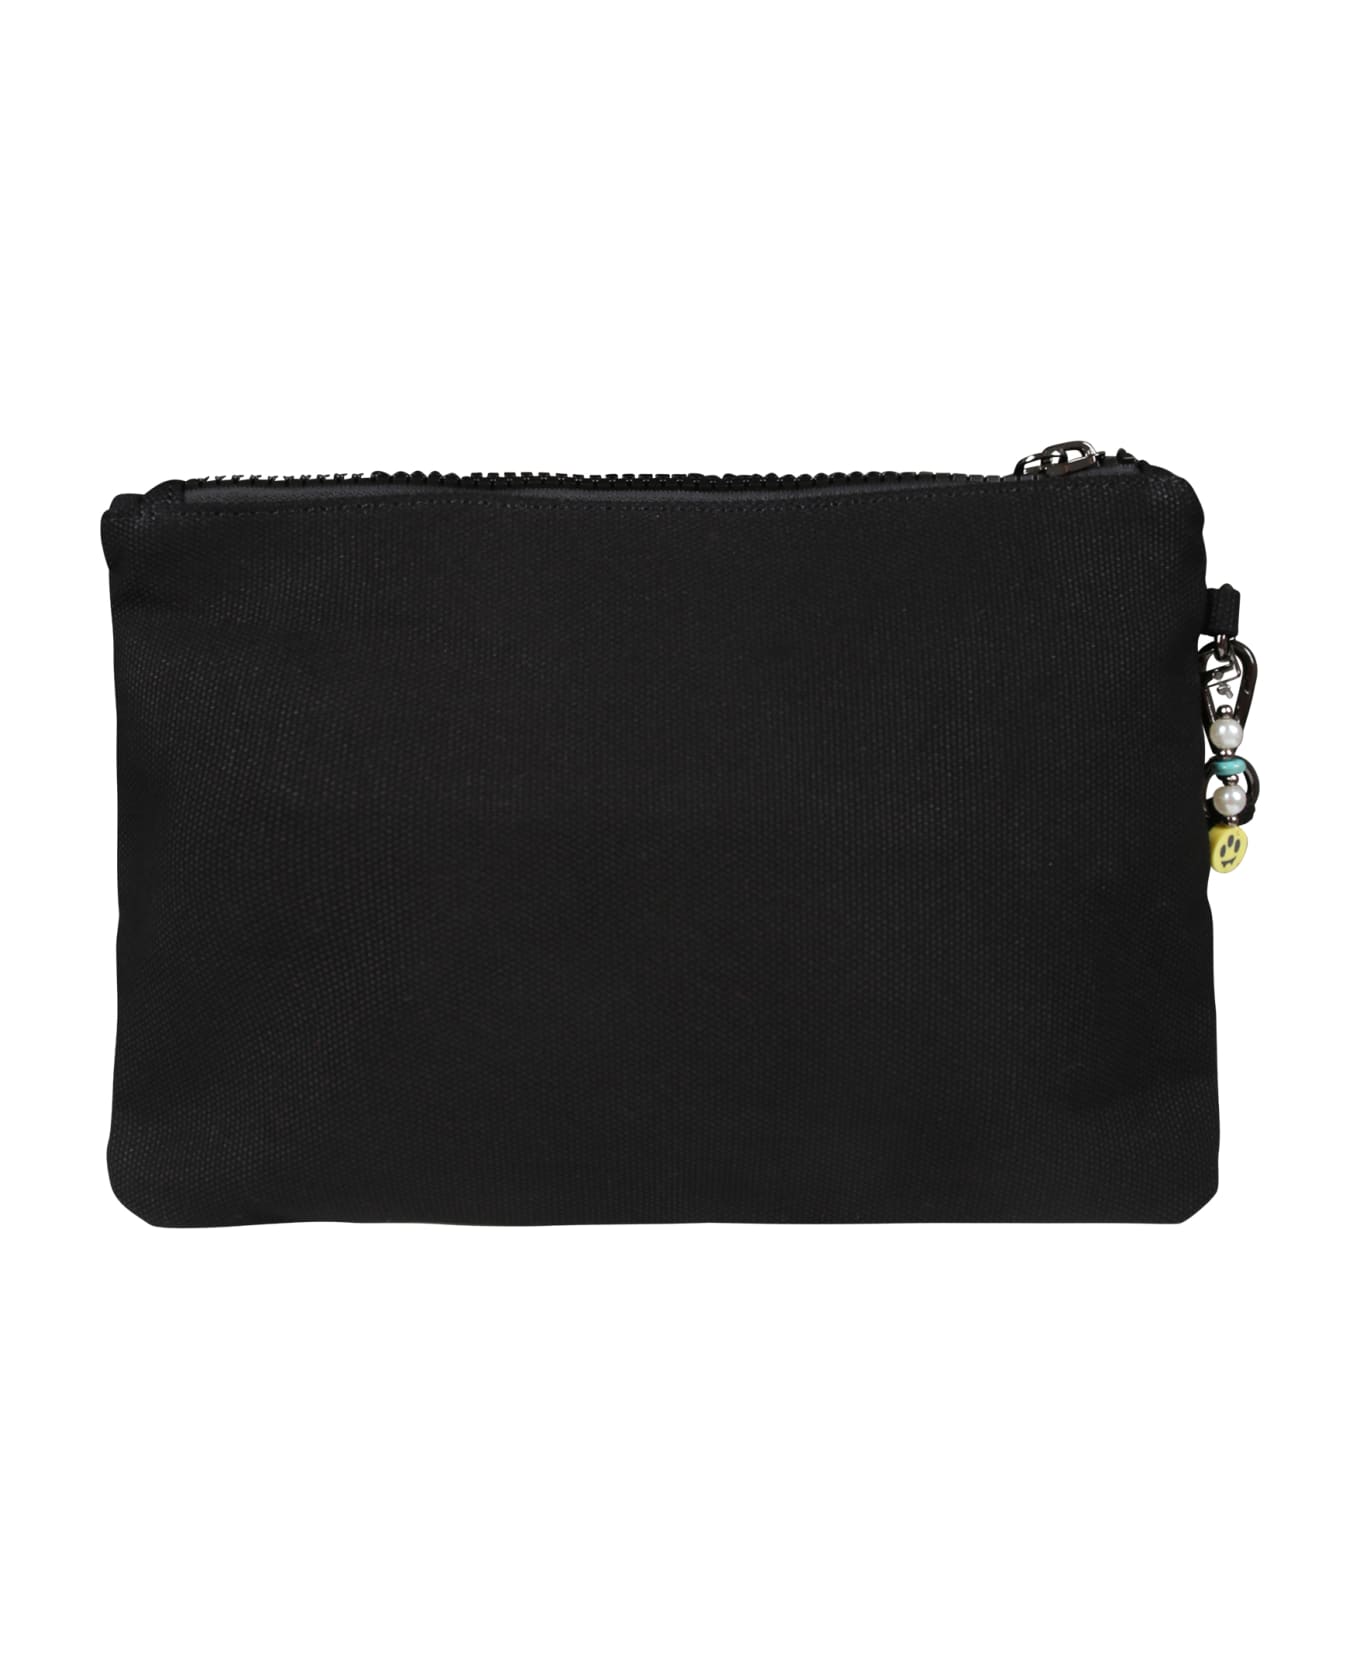 Barrow Black Clutch Bag For Girl With Logo And Smiley - Black アクセサリー＆ギフト